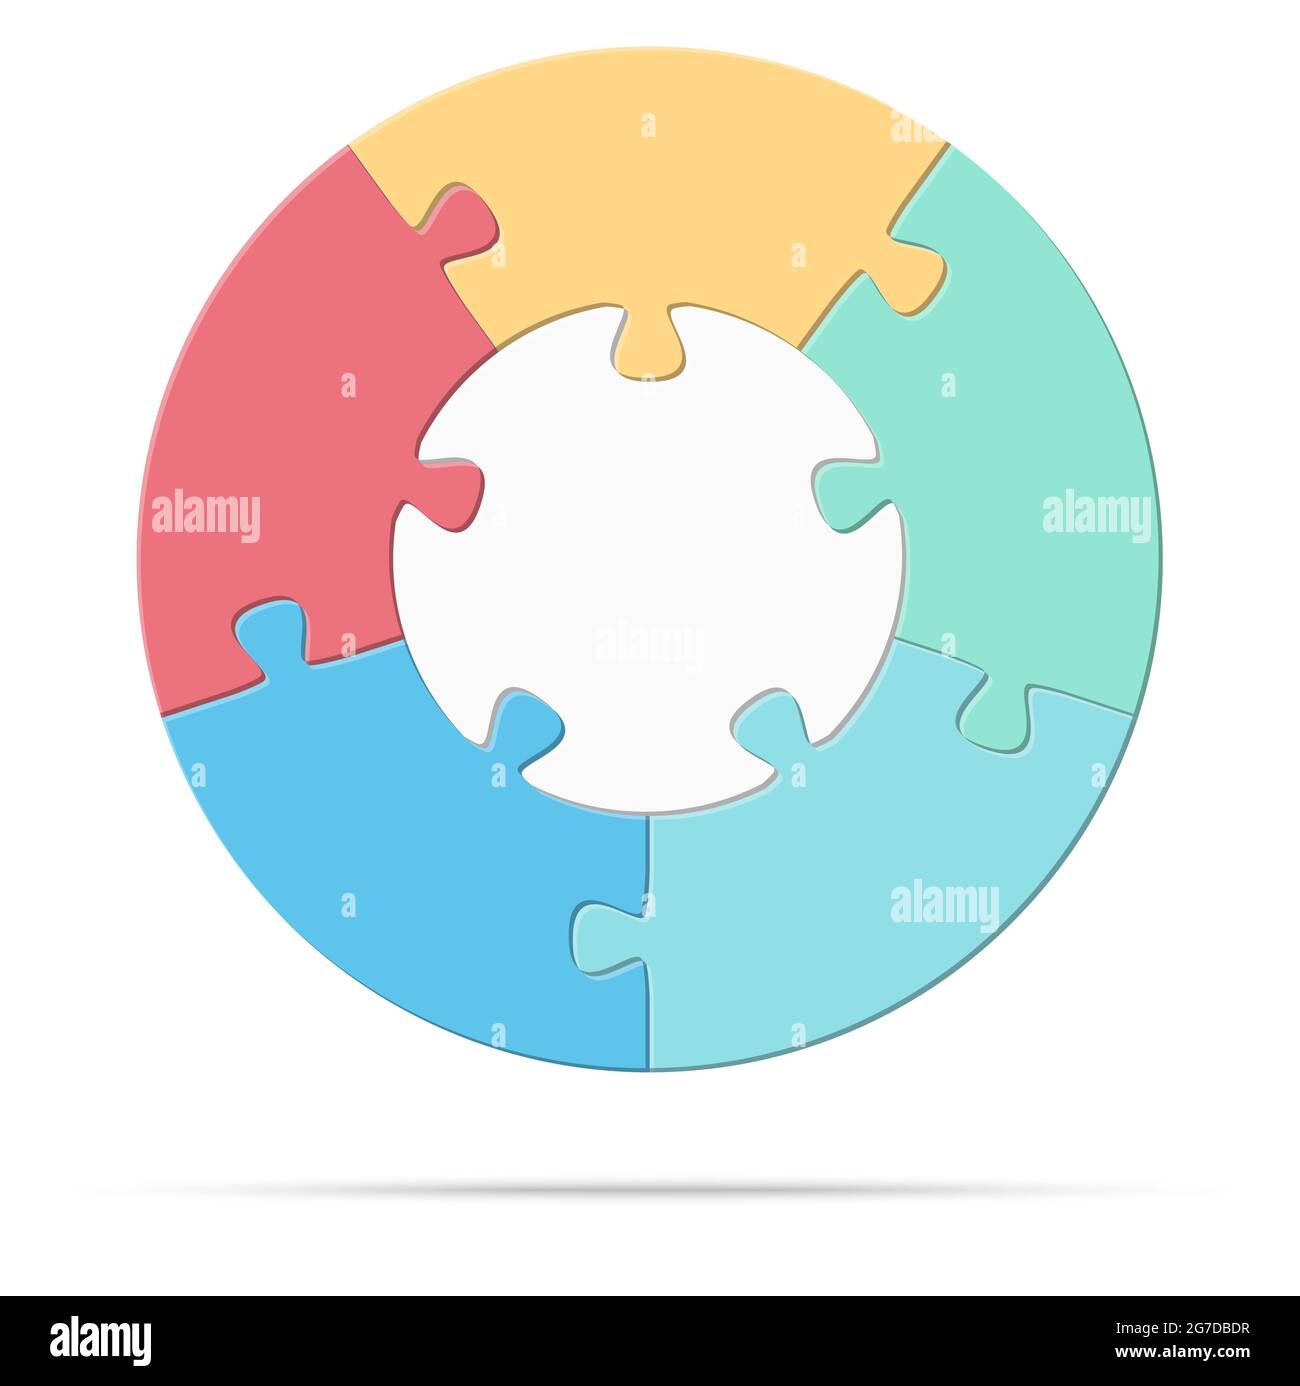 eps vector illustration of round colored puzzle symbolizing cooperation or teamwork process with white base, five options idea Stock Vector